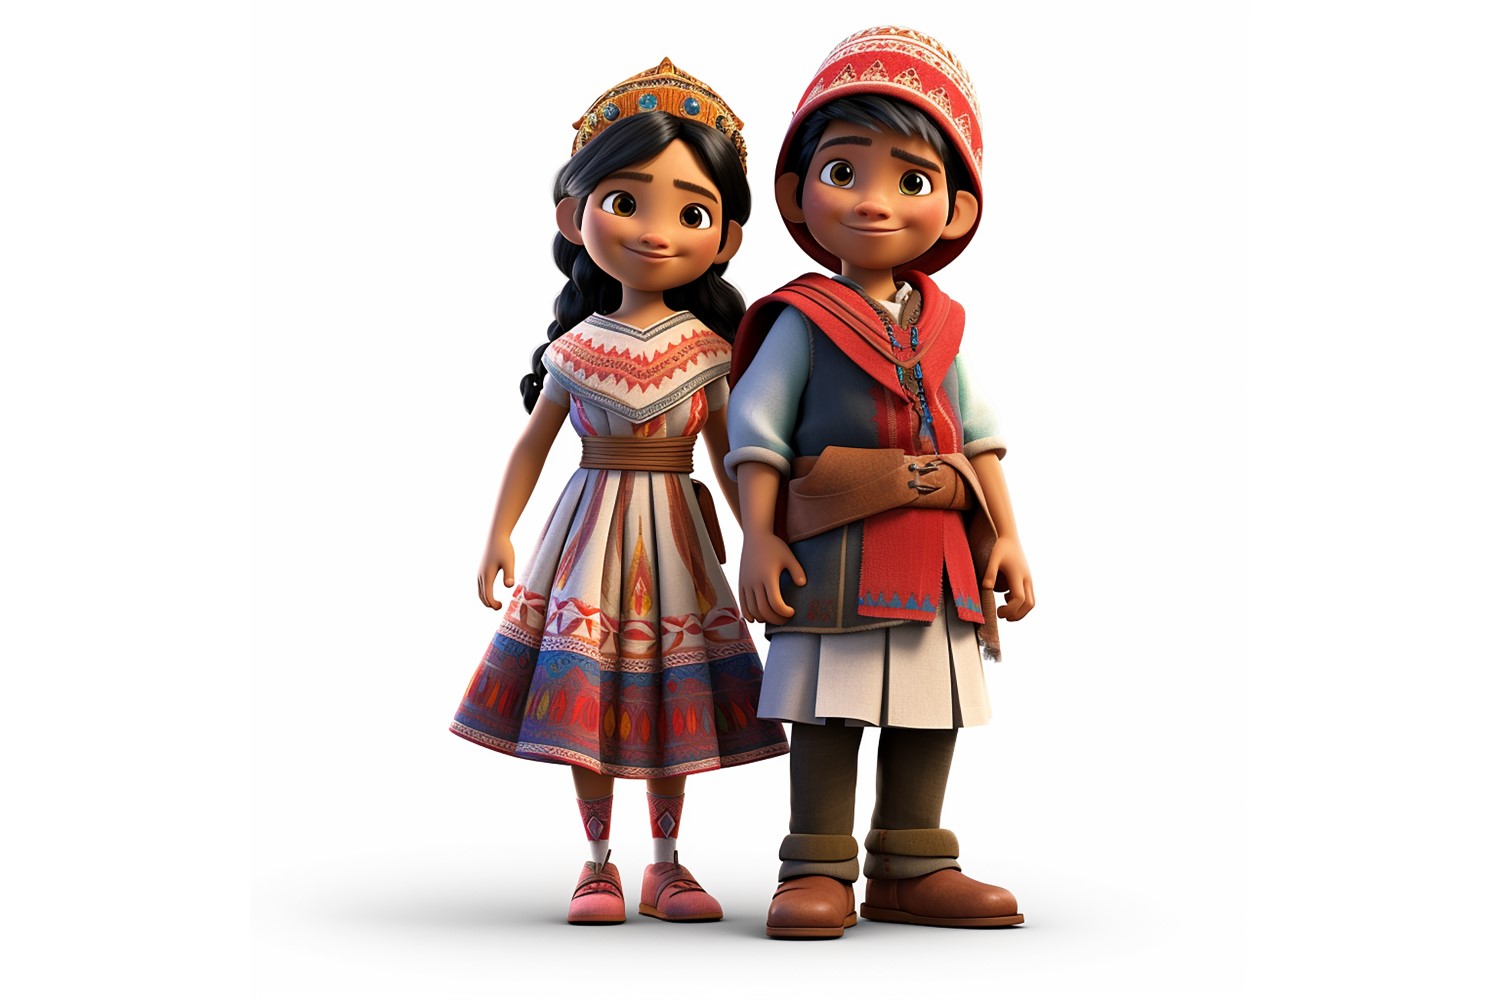 Boy And Girl Couple World Races In Traditional Cultural Dress 235